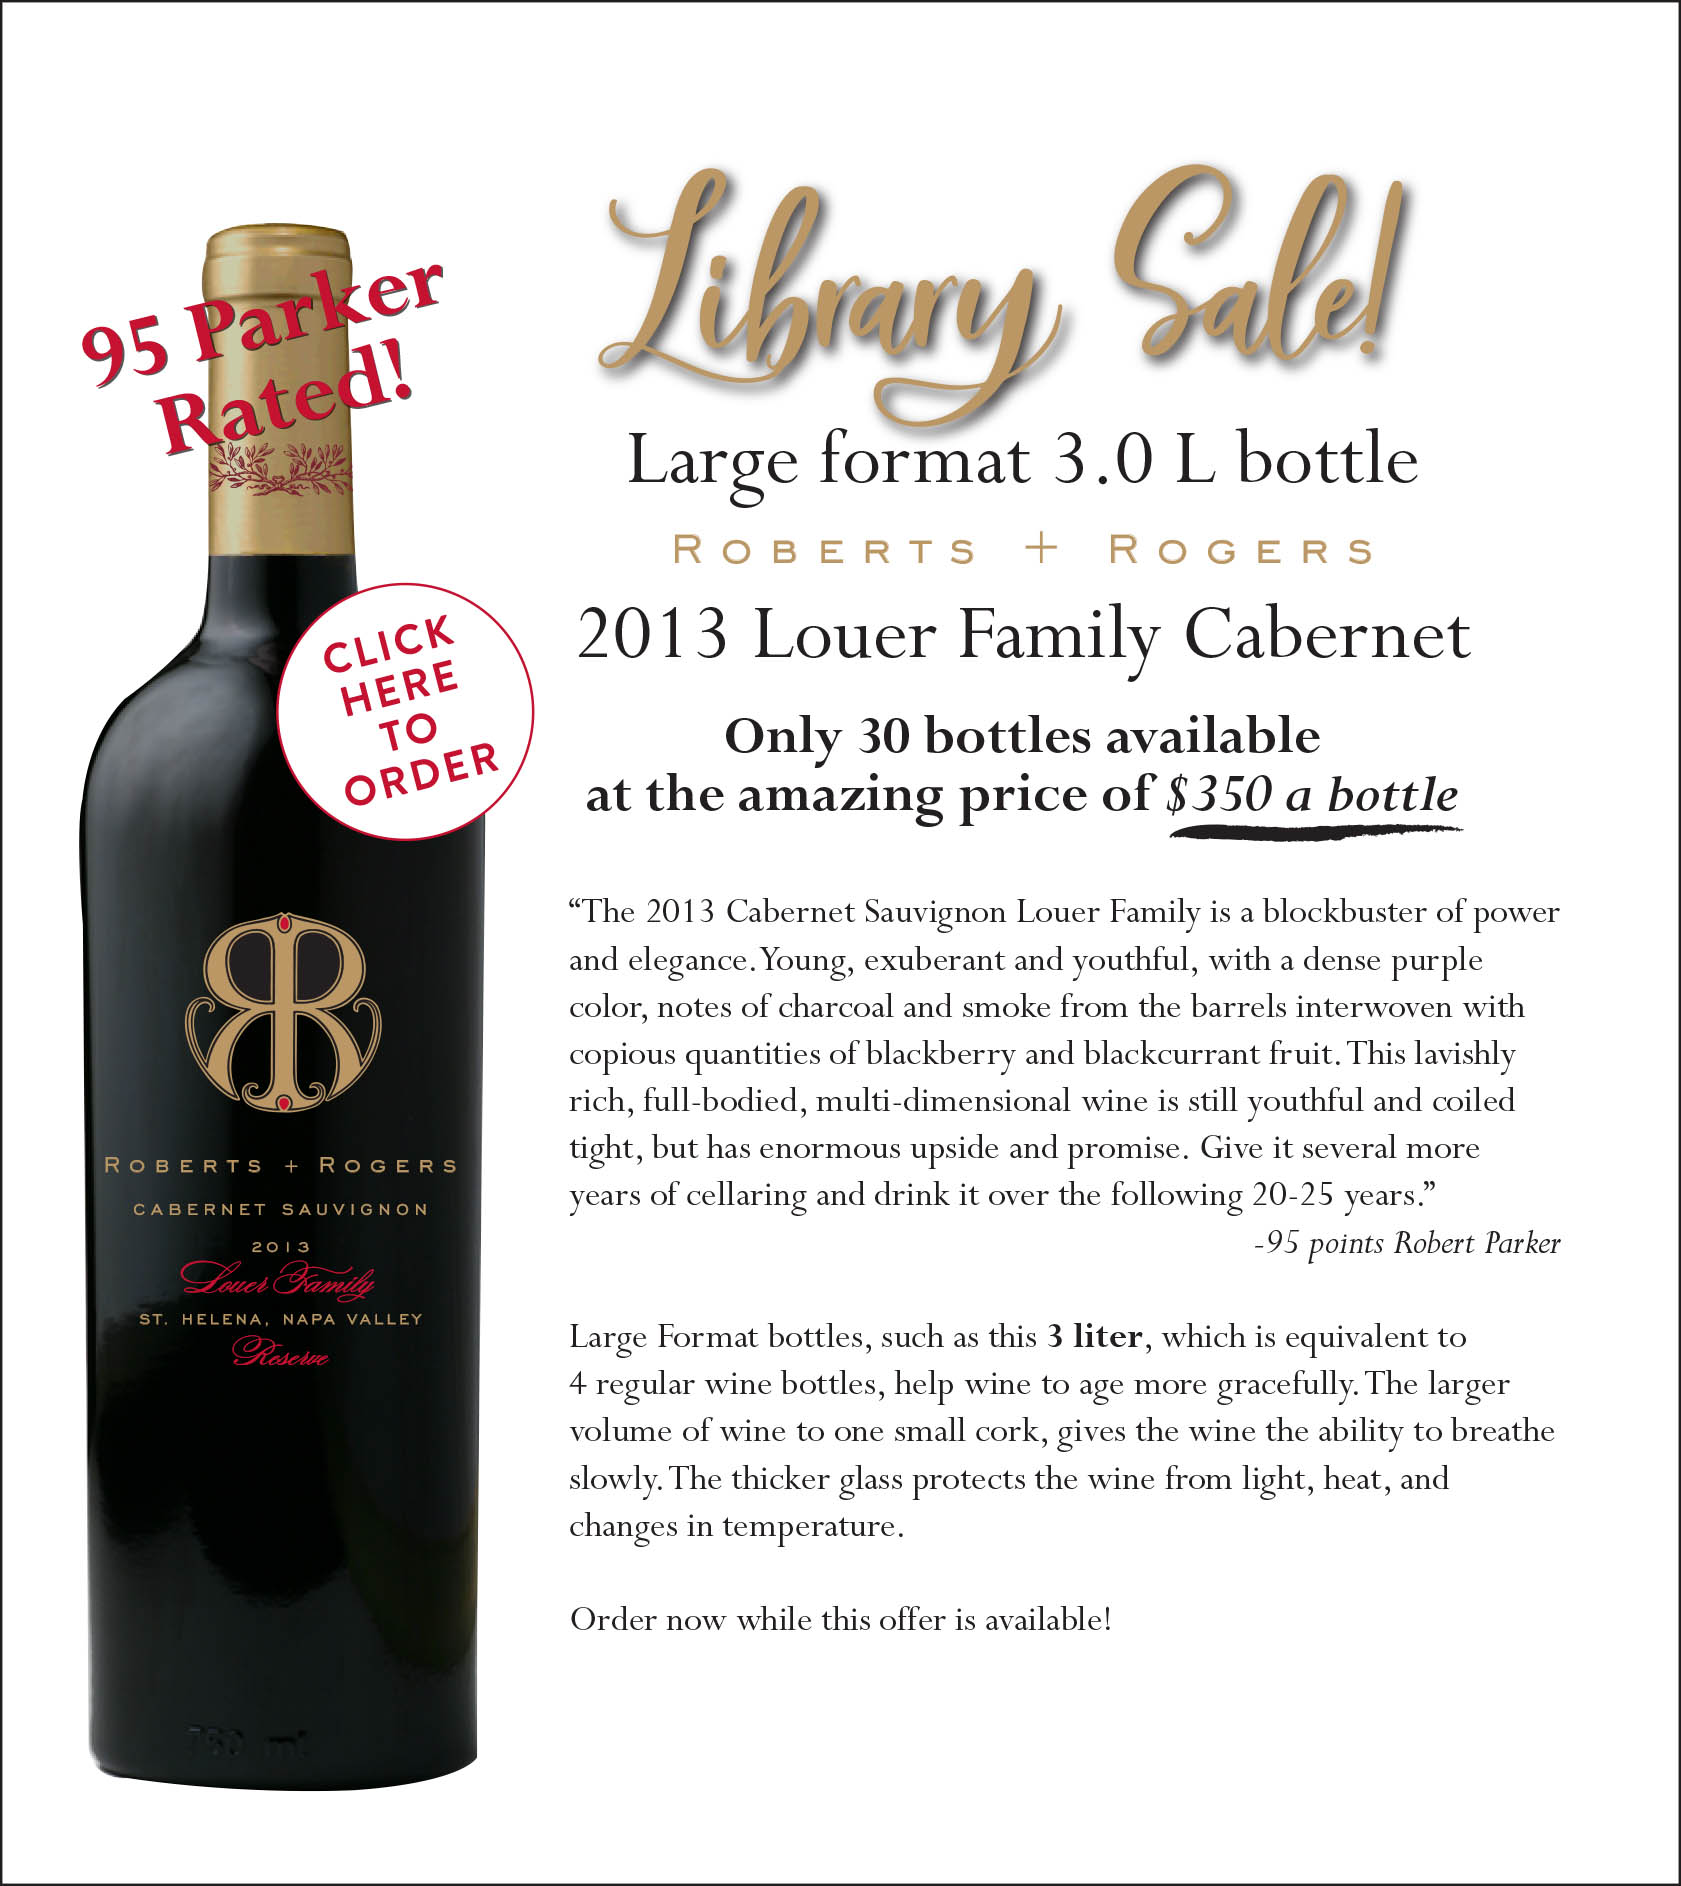 Product Image for 2013 R+R Louer Cab 3 Liter Special!